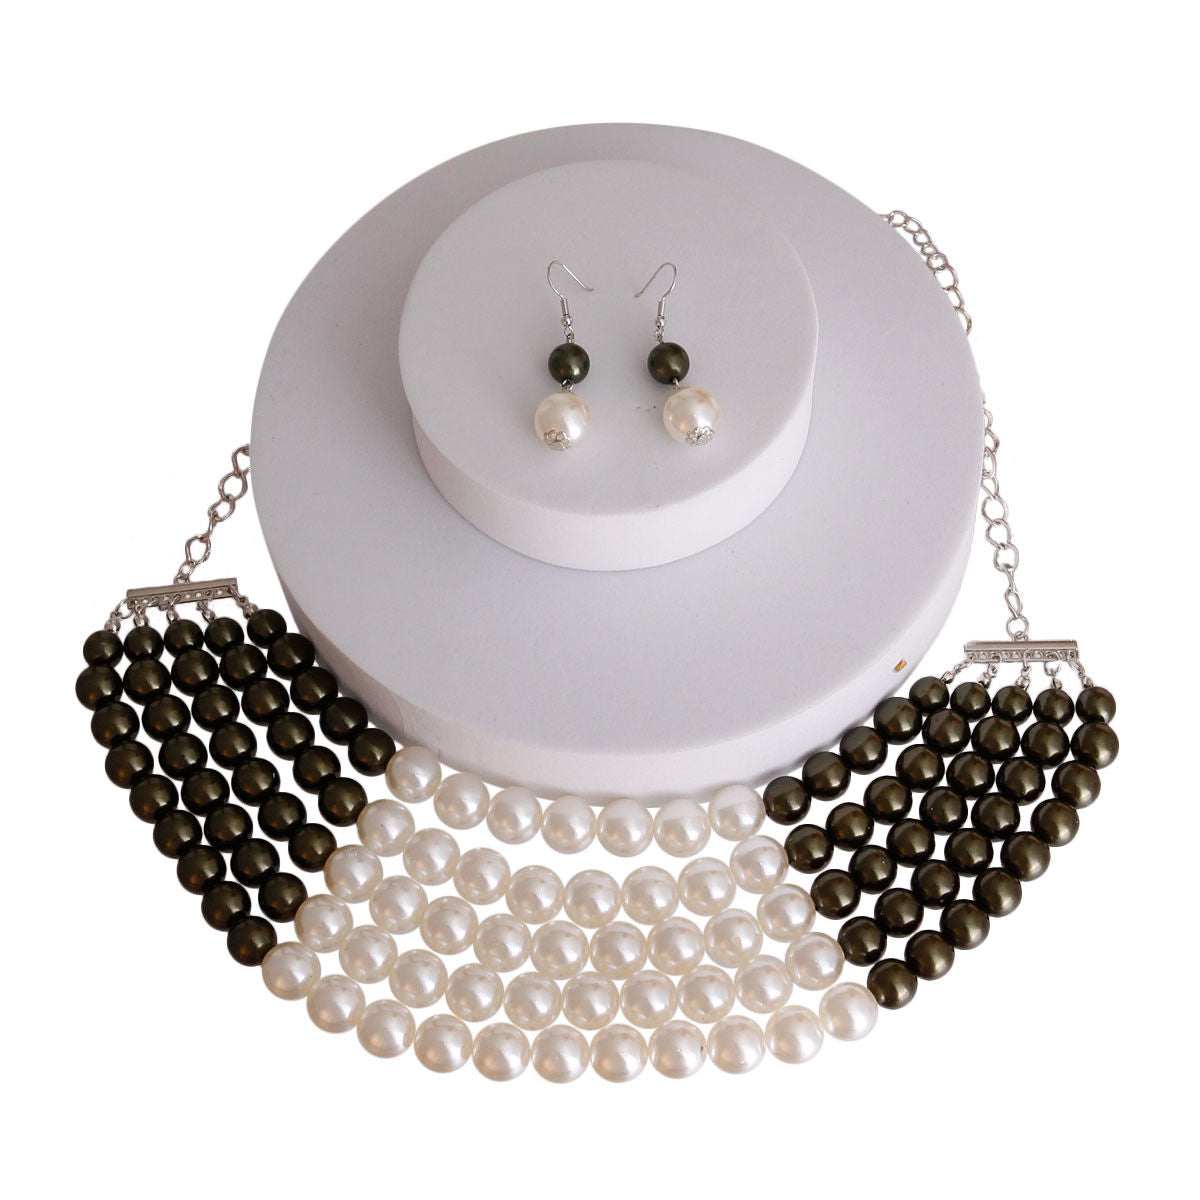 Olive and Cream Pearl 5 Row Necklace